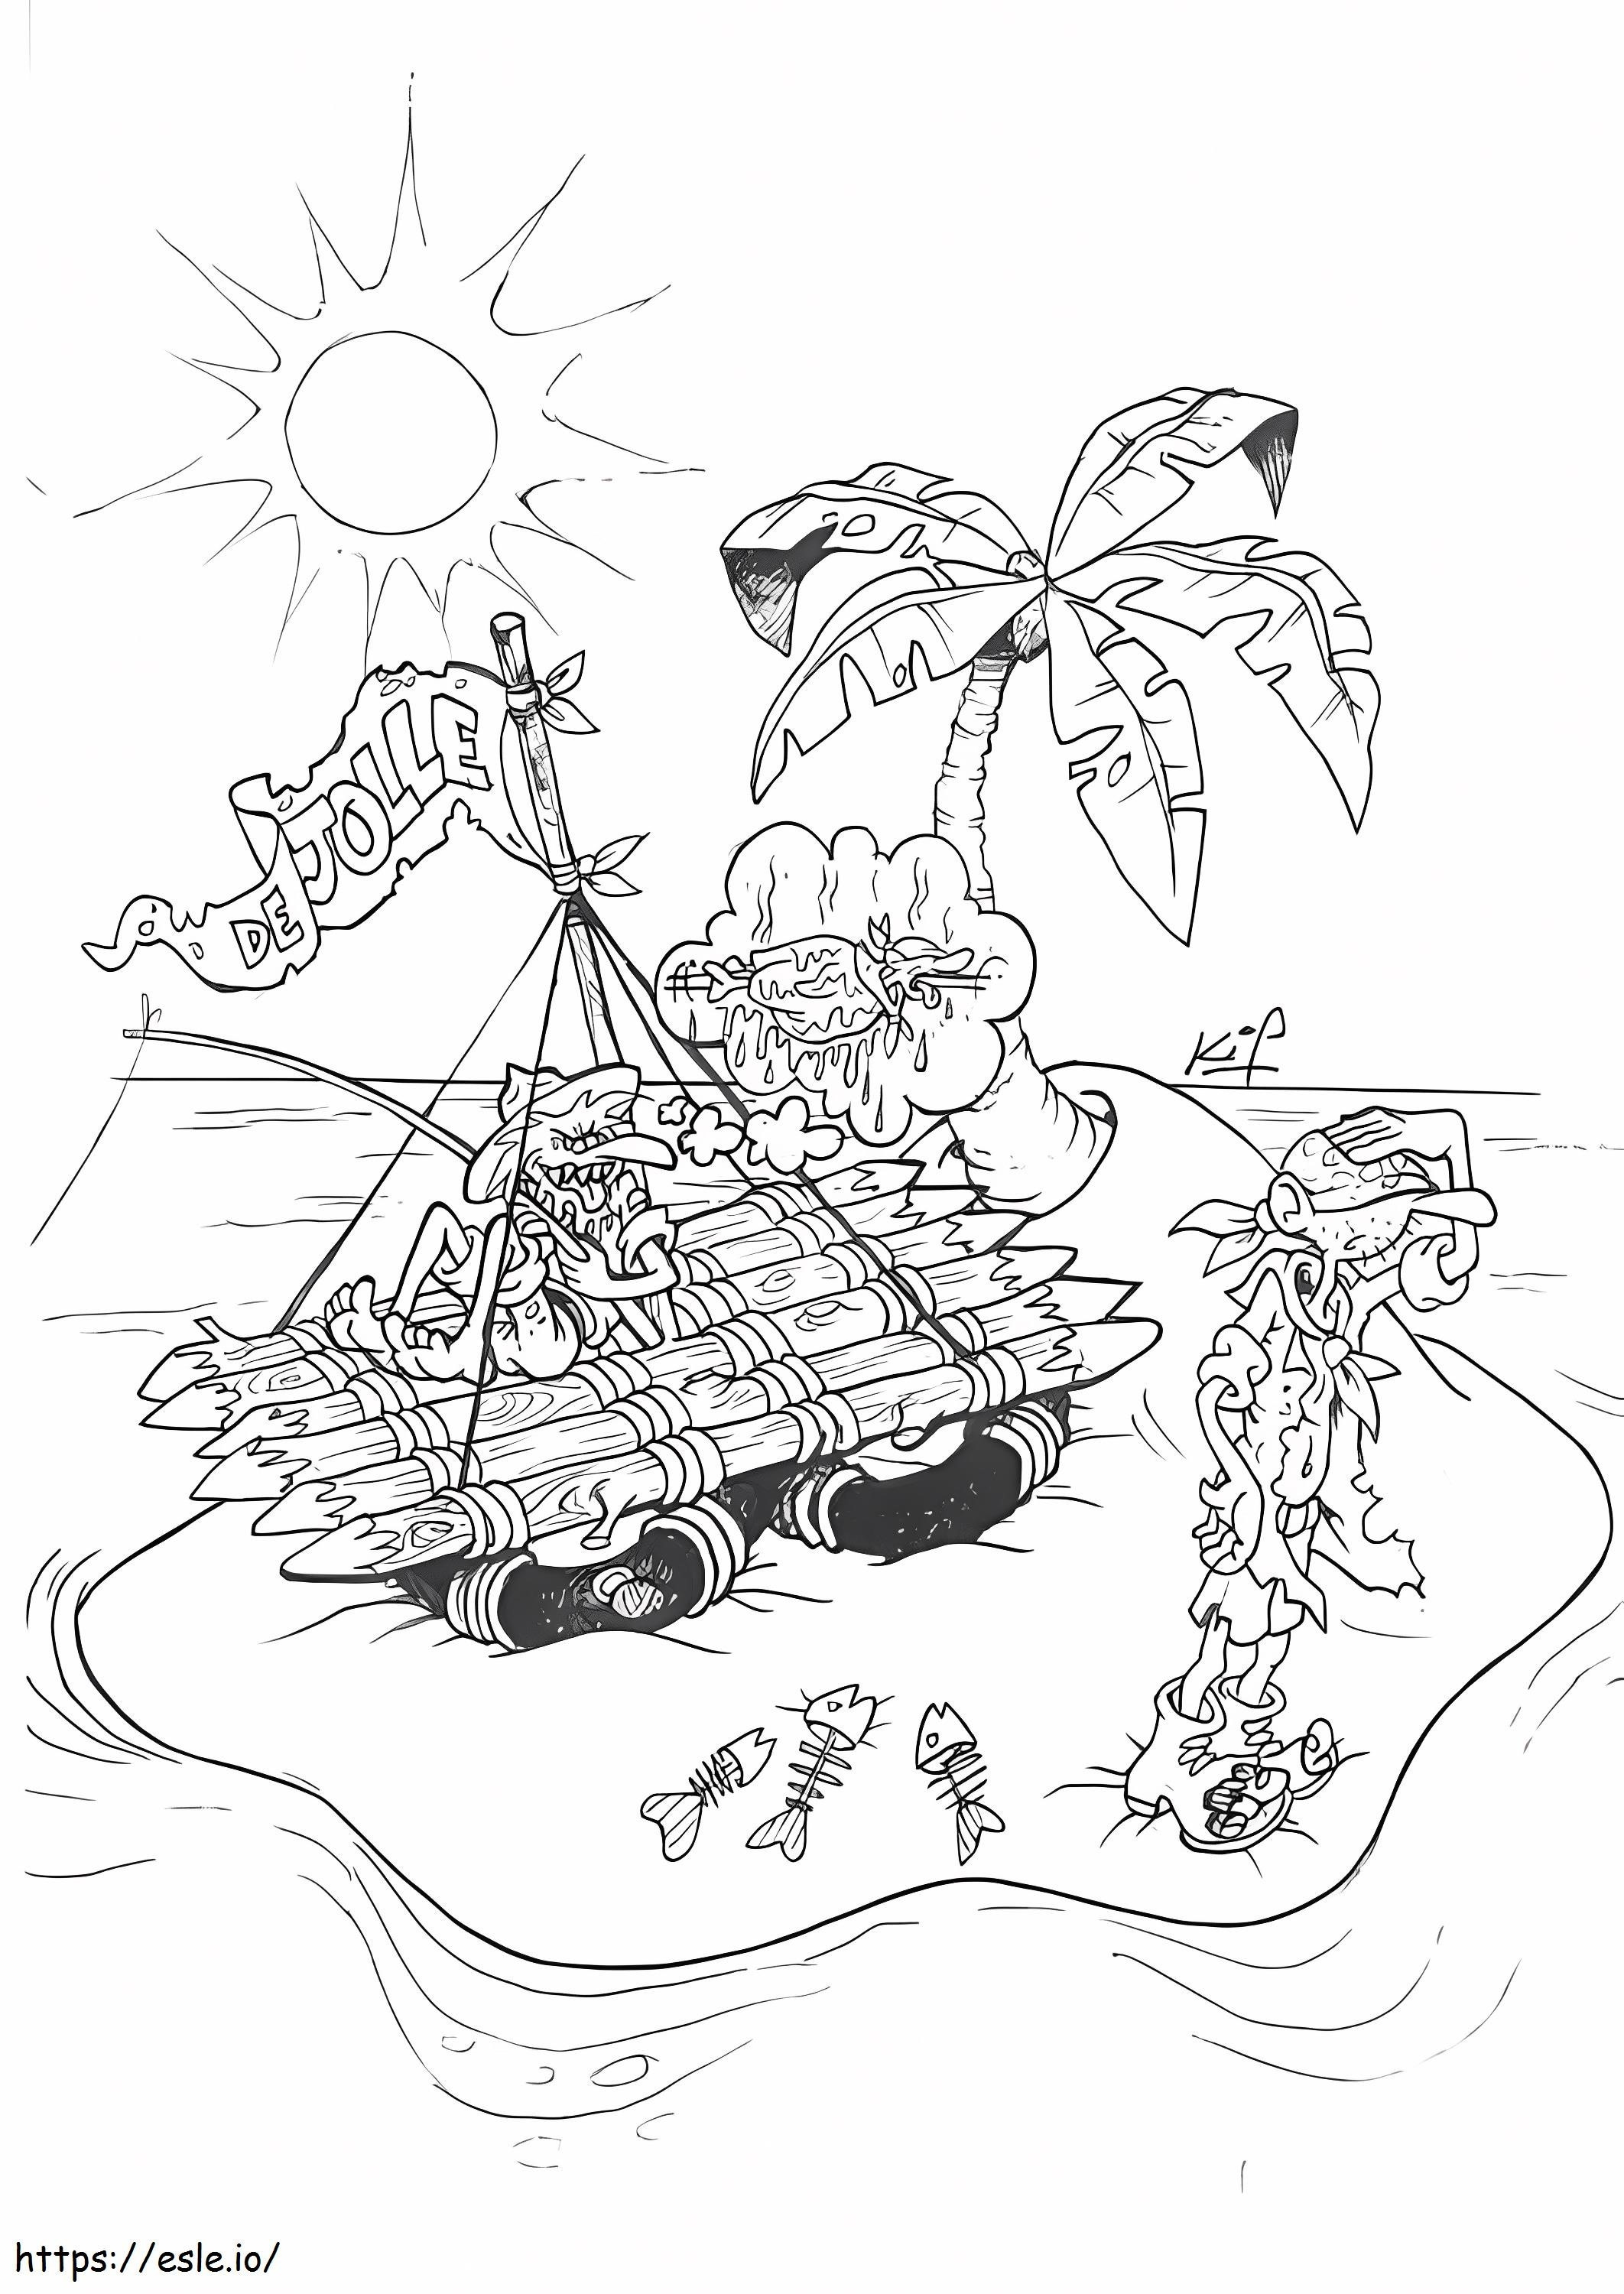 Crazy Man On Raft coloring page